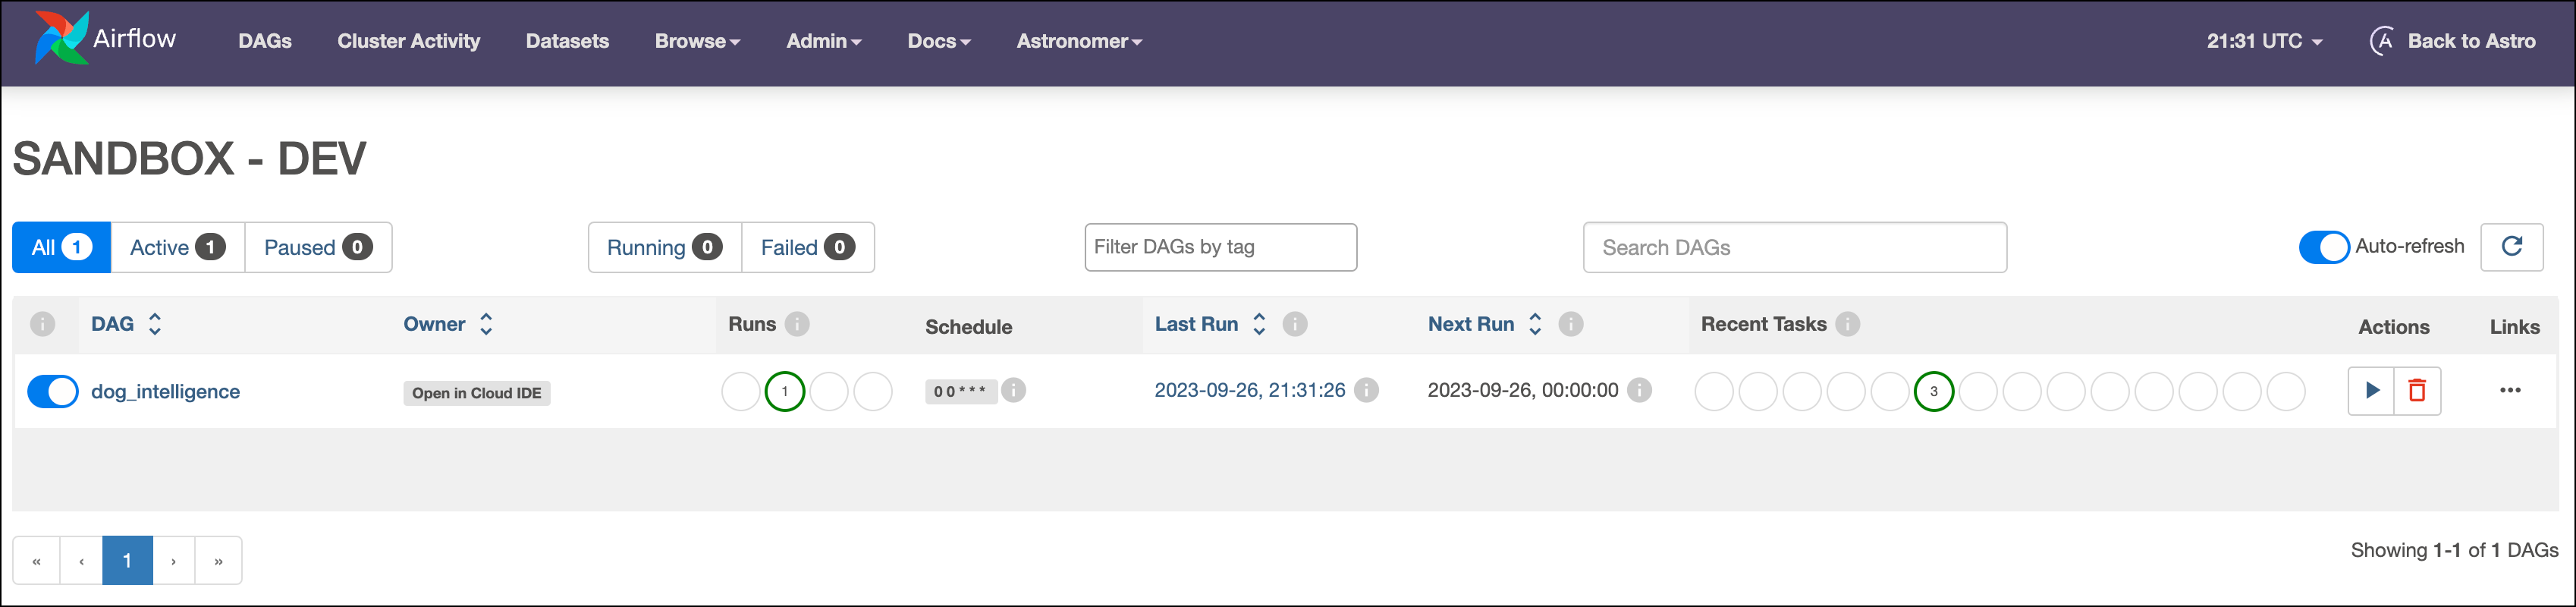 Screenshot of the Airflow UI of an Astro deployment showing a successful run of the DAG.